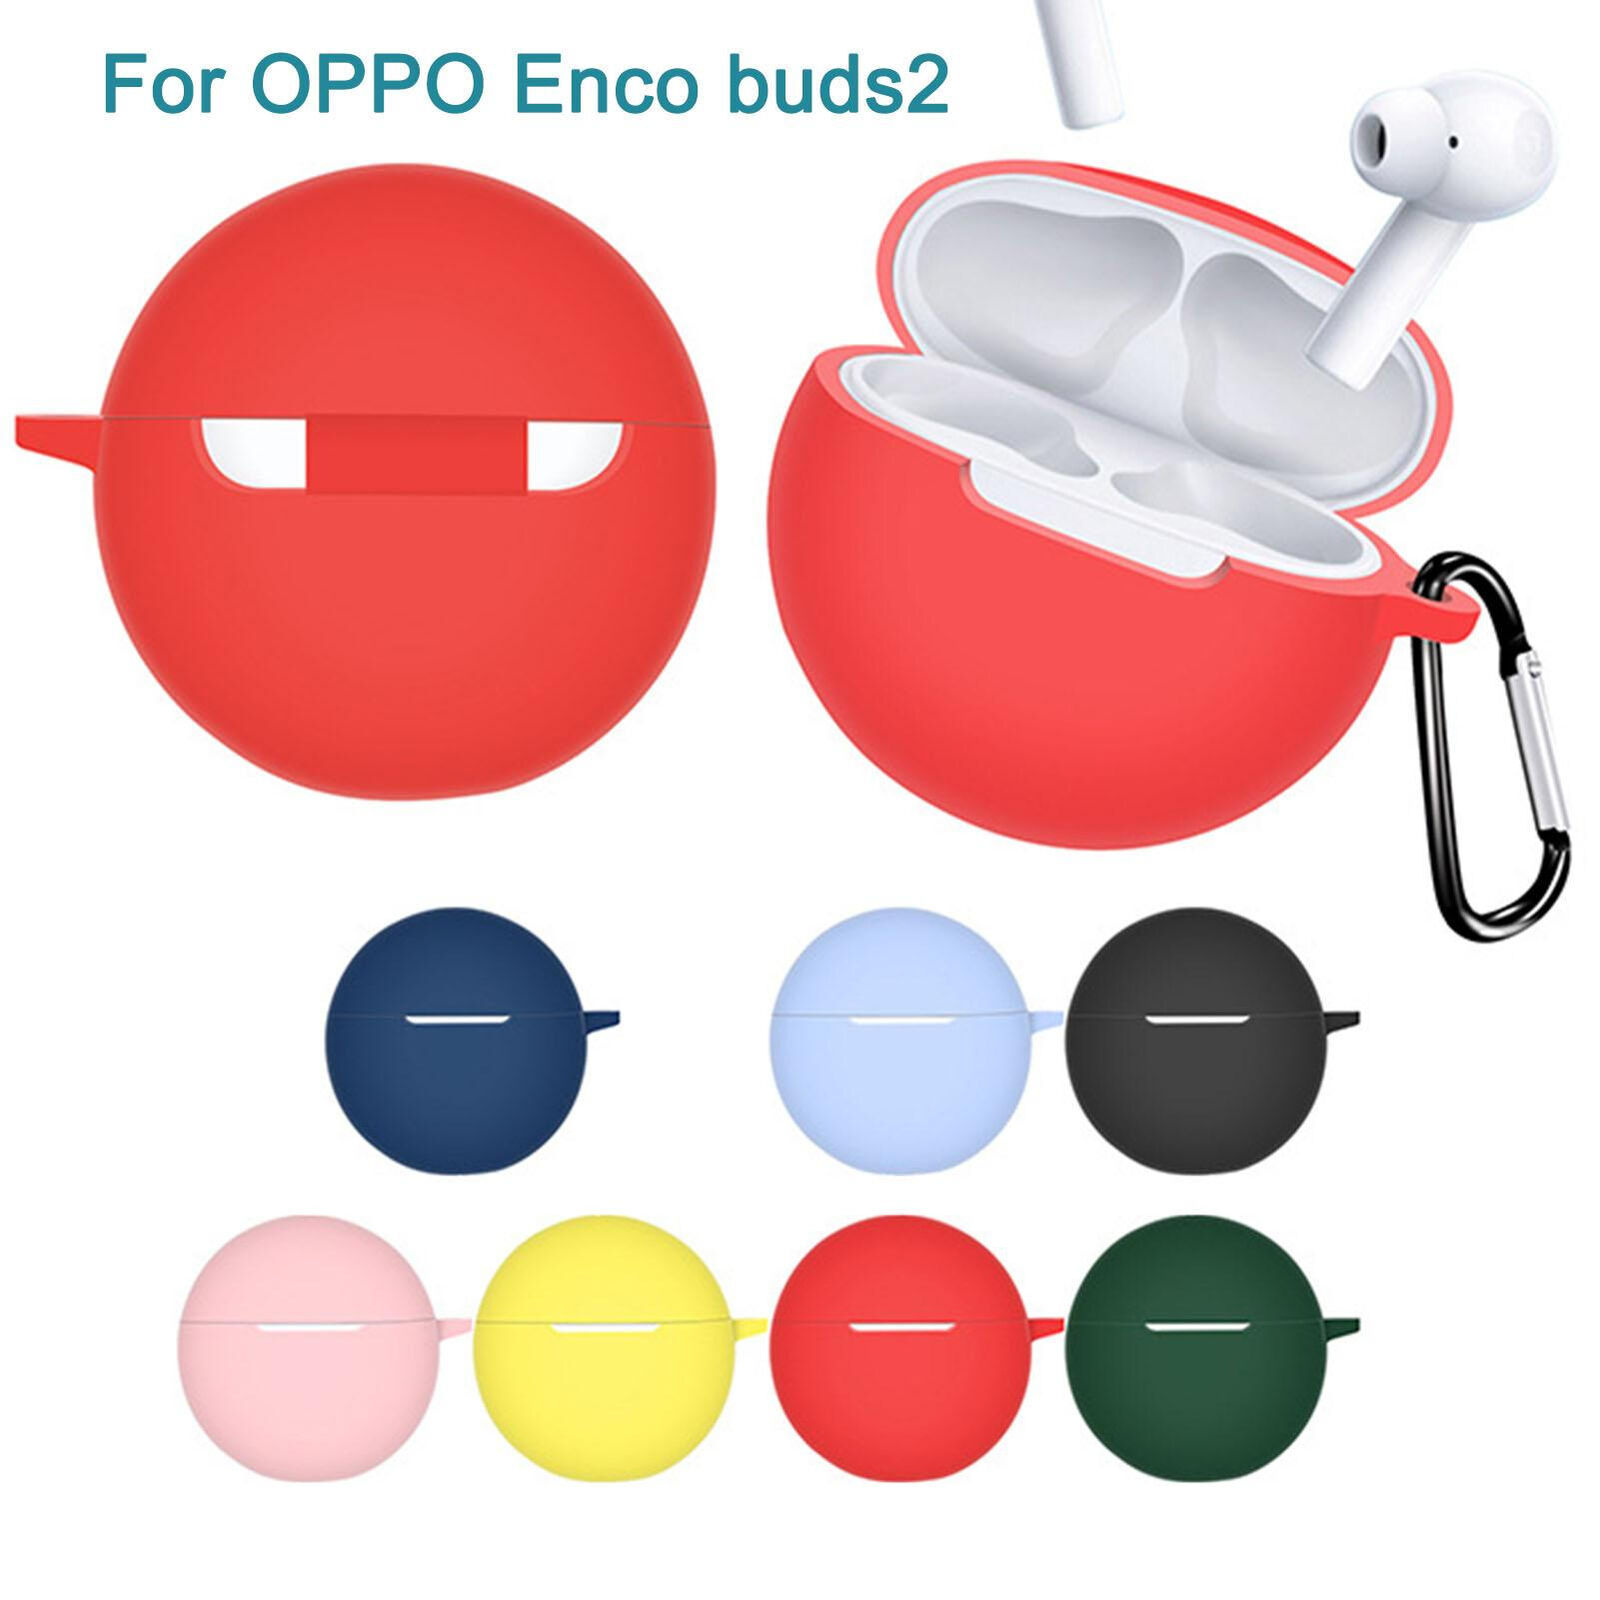 Silicone Earphone Protective Case for OPPO Enco buds 2 Dust Cover